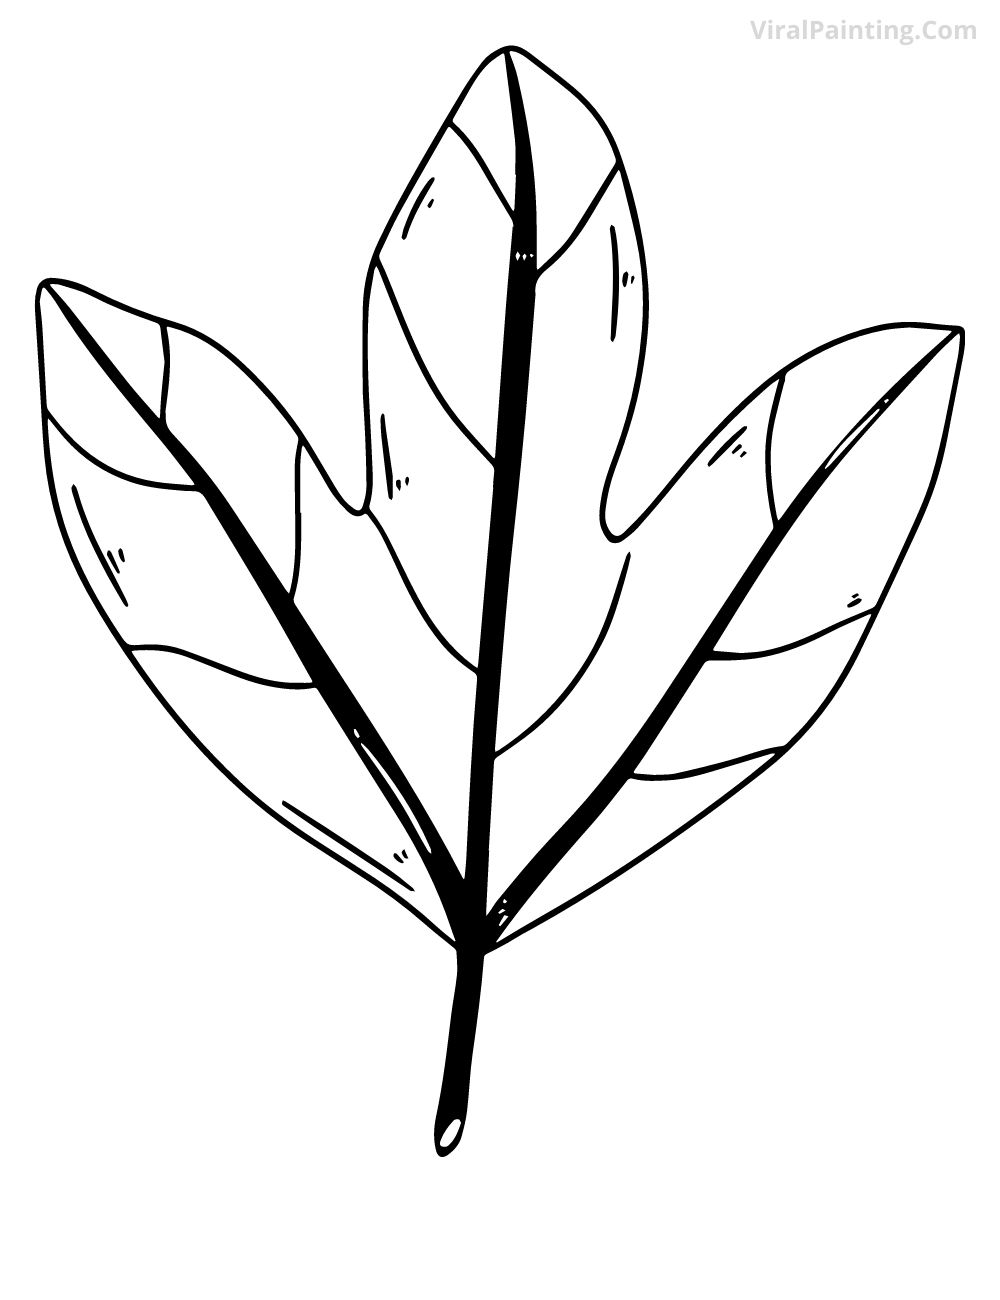 2023 By viralpainting.com Leaf drawing ideas 